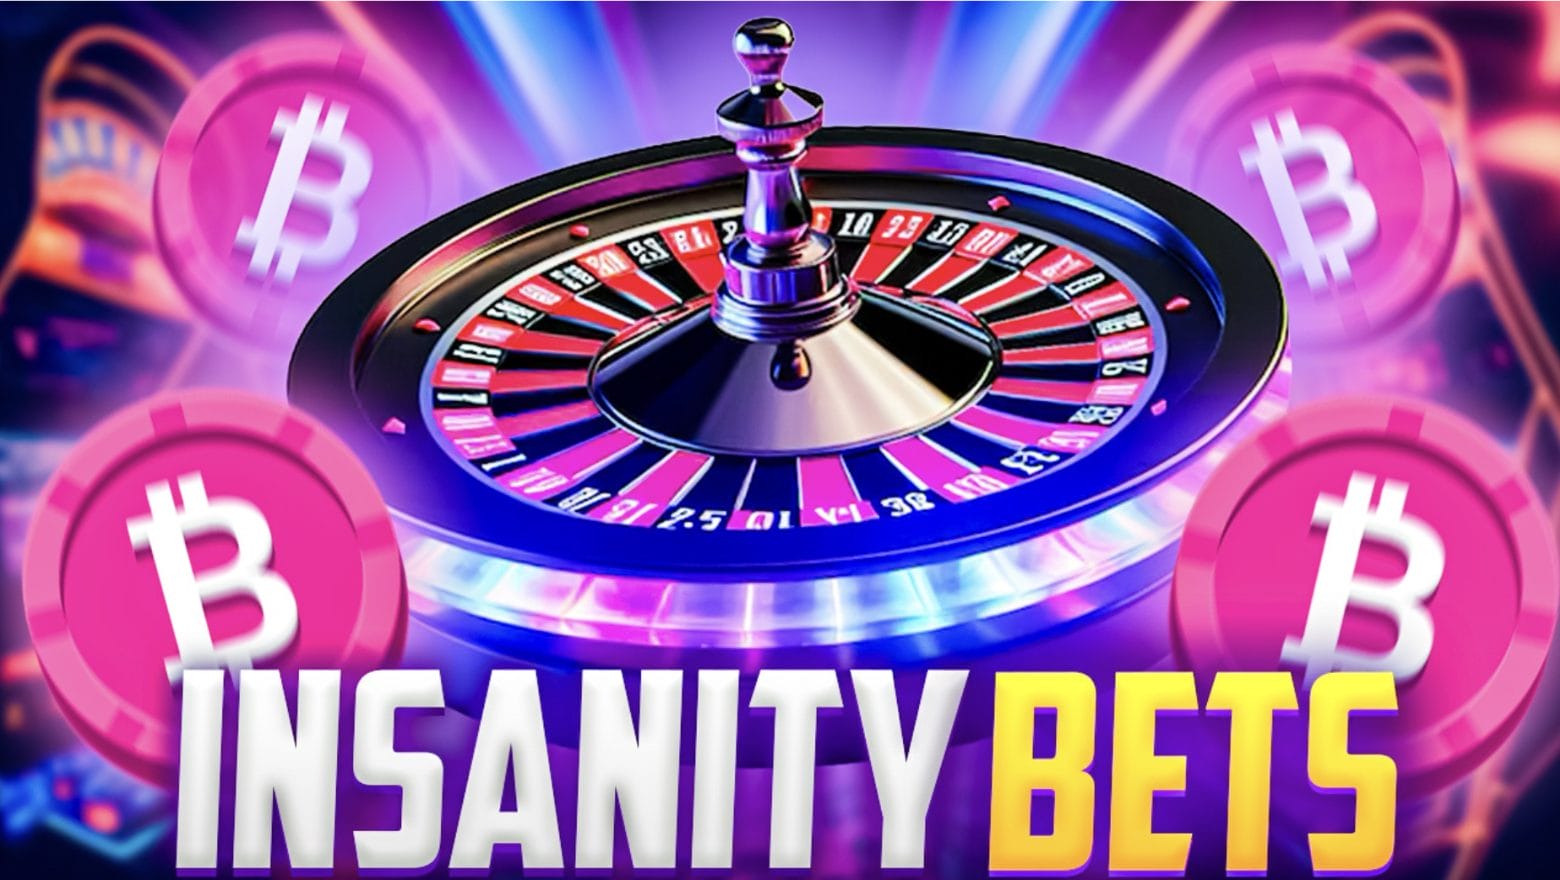 insanity-bets-banner